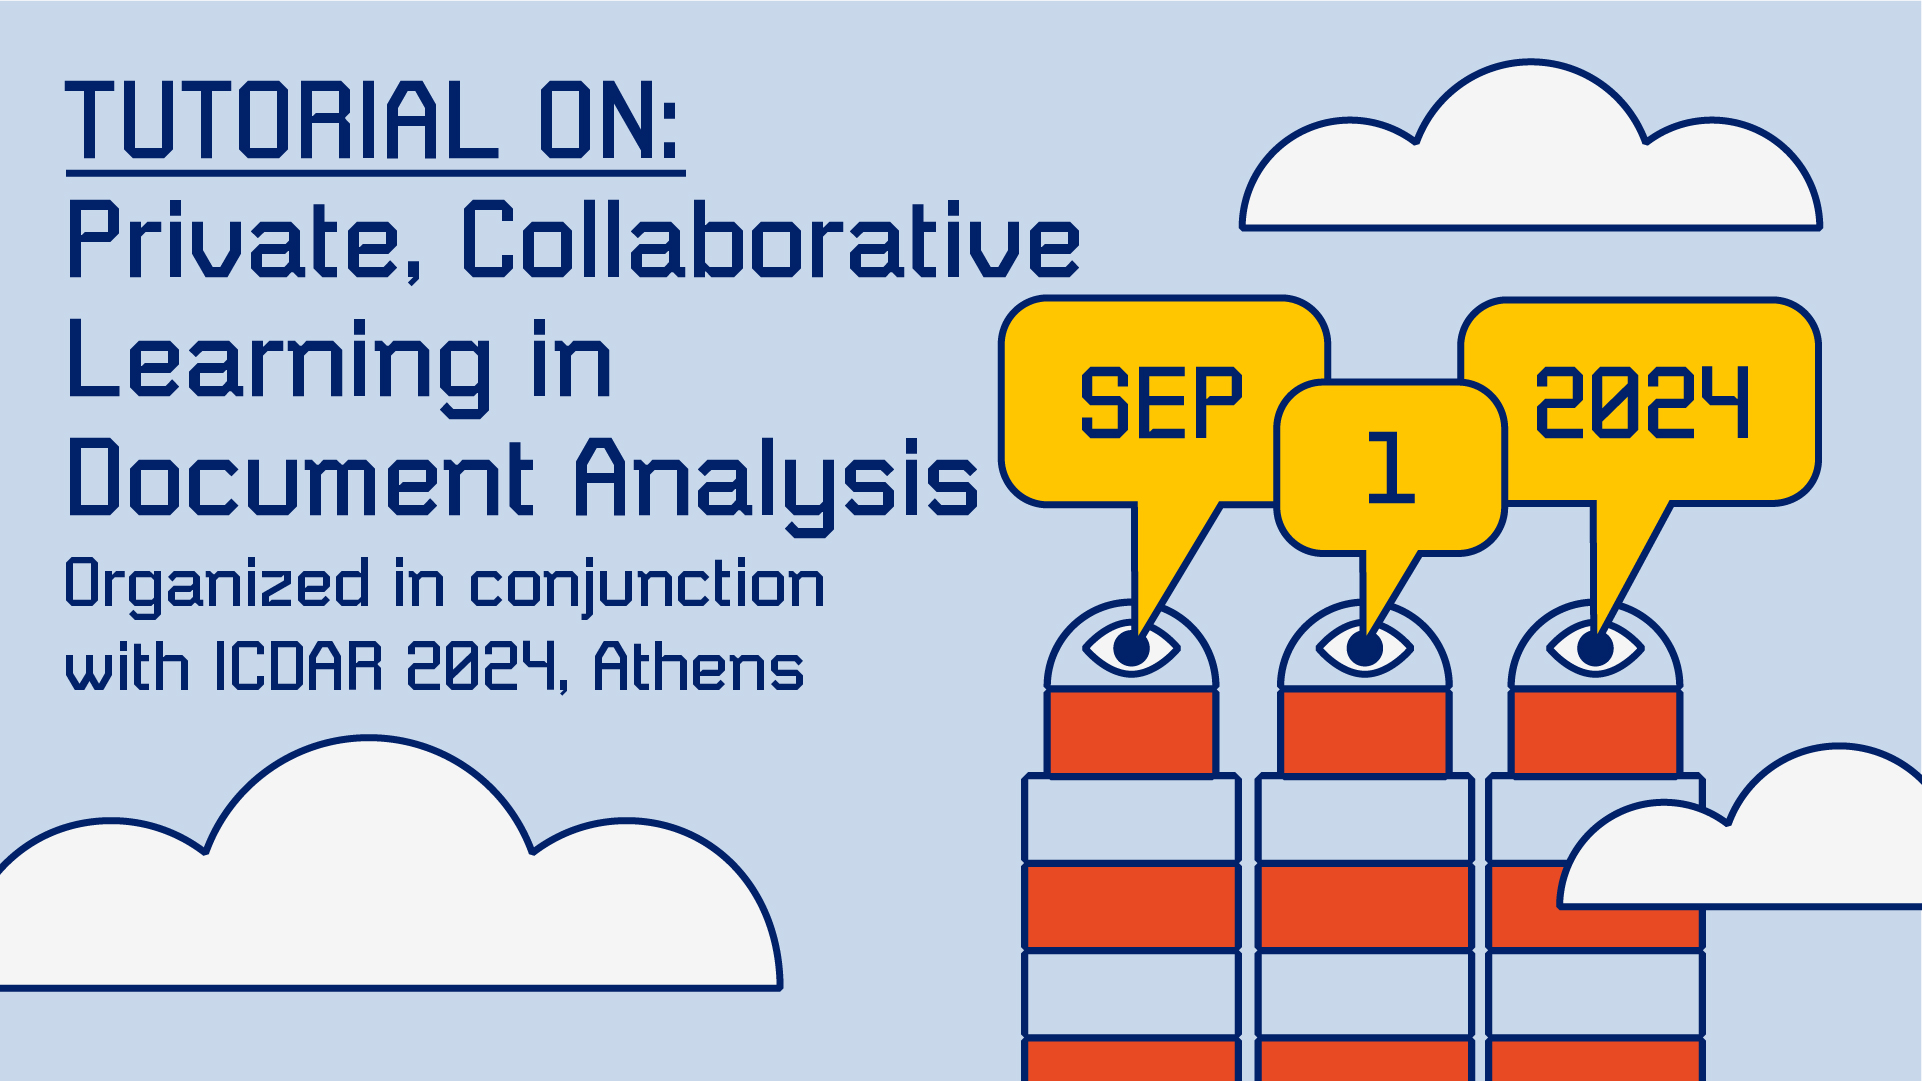 Tutorial on Private, Collaborative Learning in Document Analysis